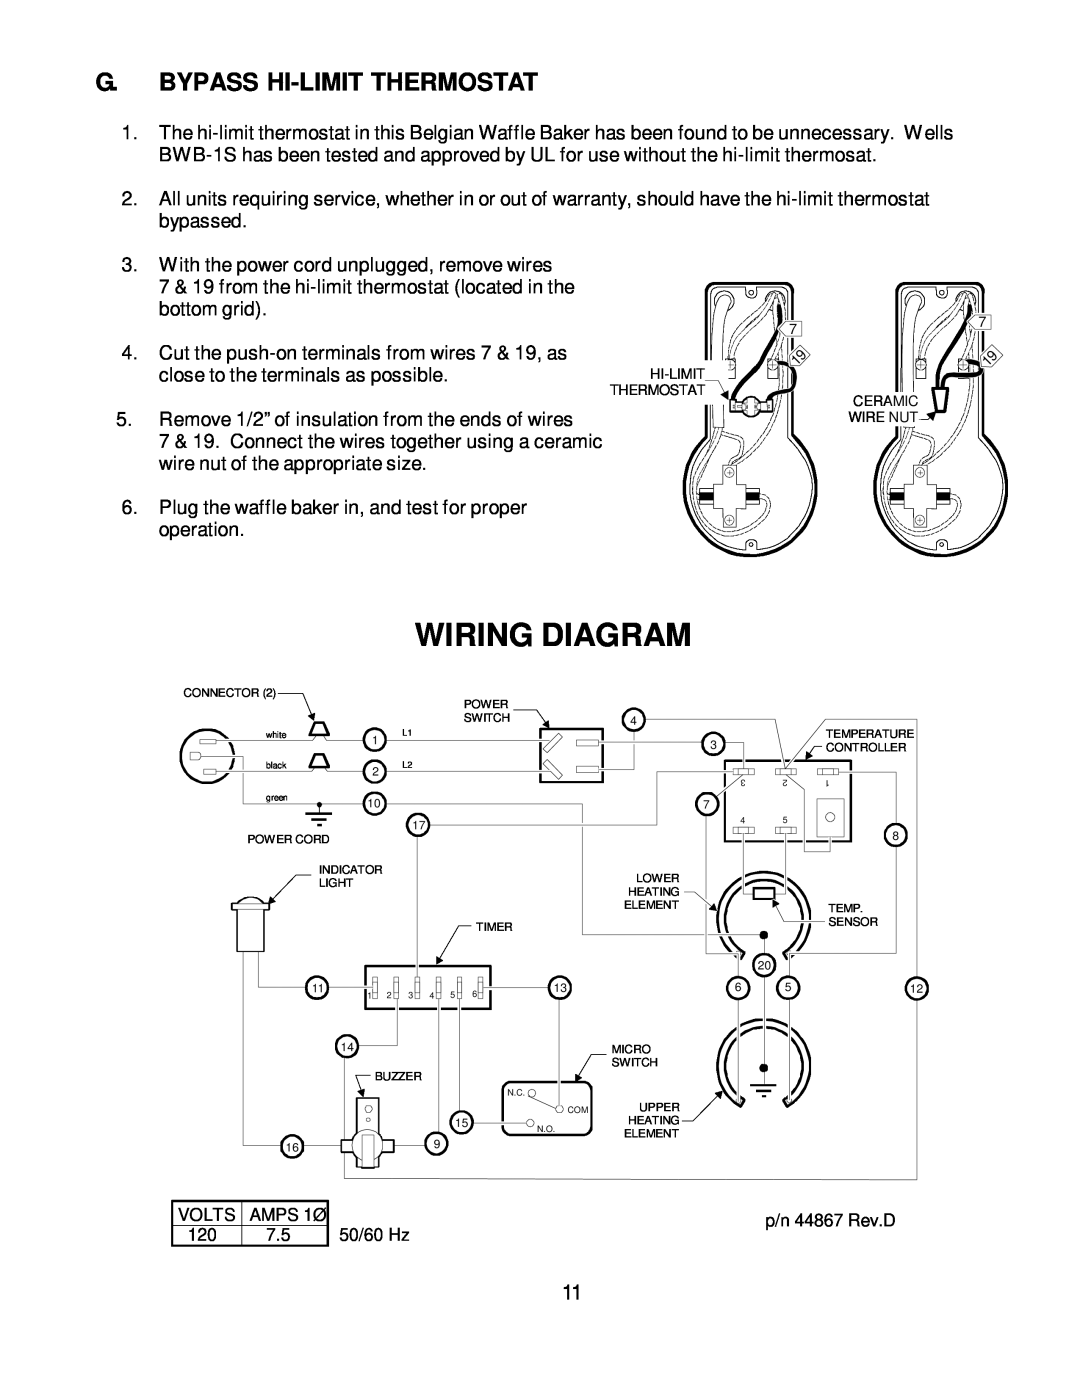 Wells BWB-1S manual Wiring Diagram, G.Bypass Hi-Limitthermostat 